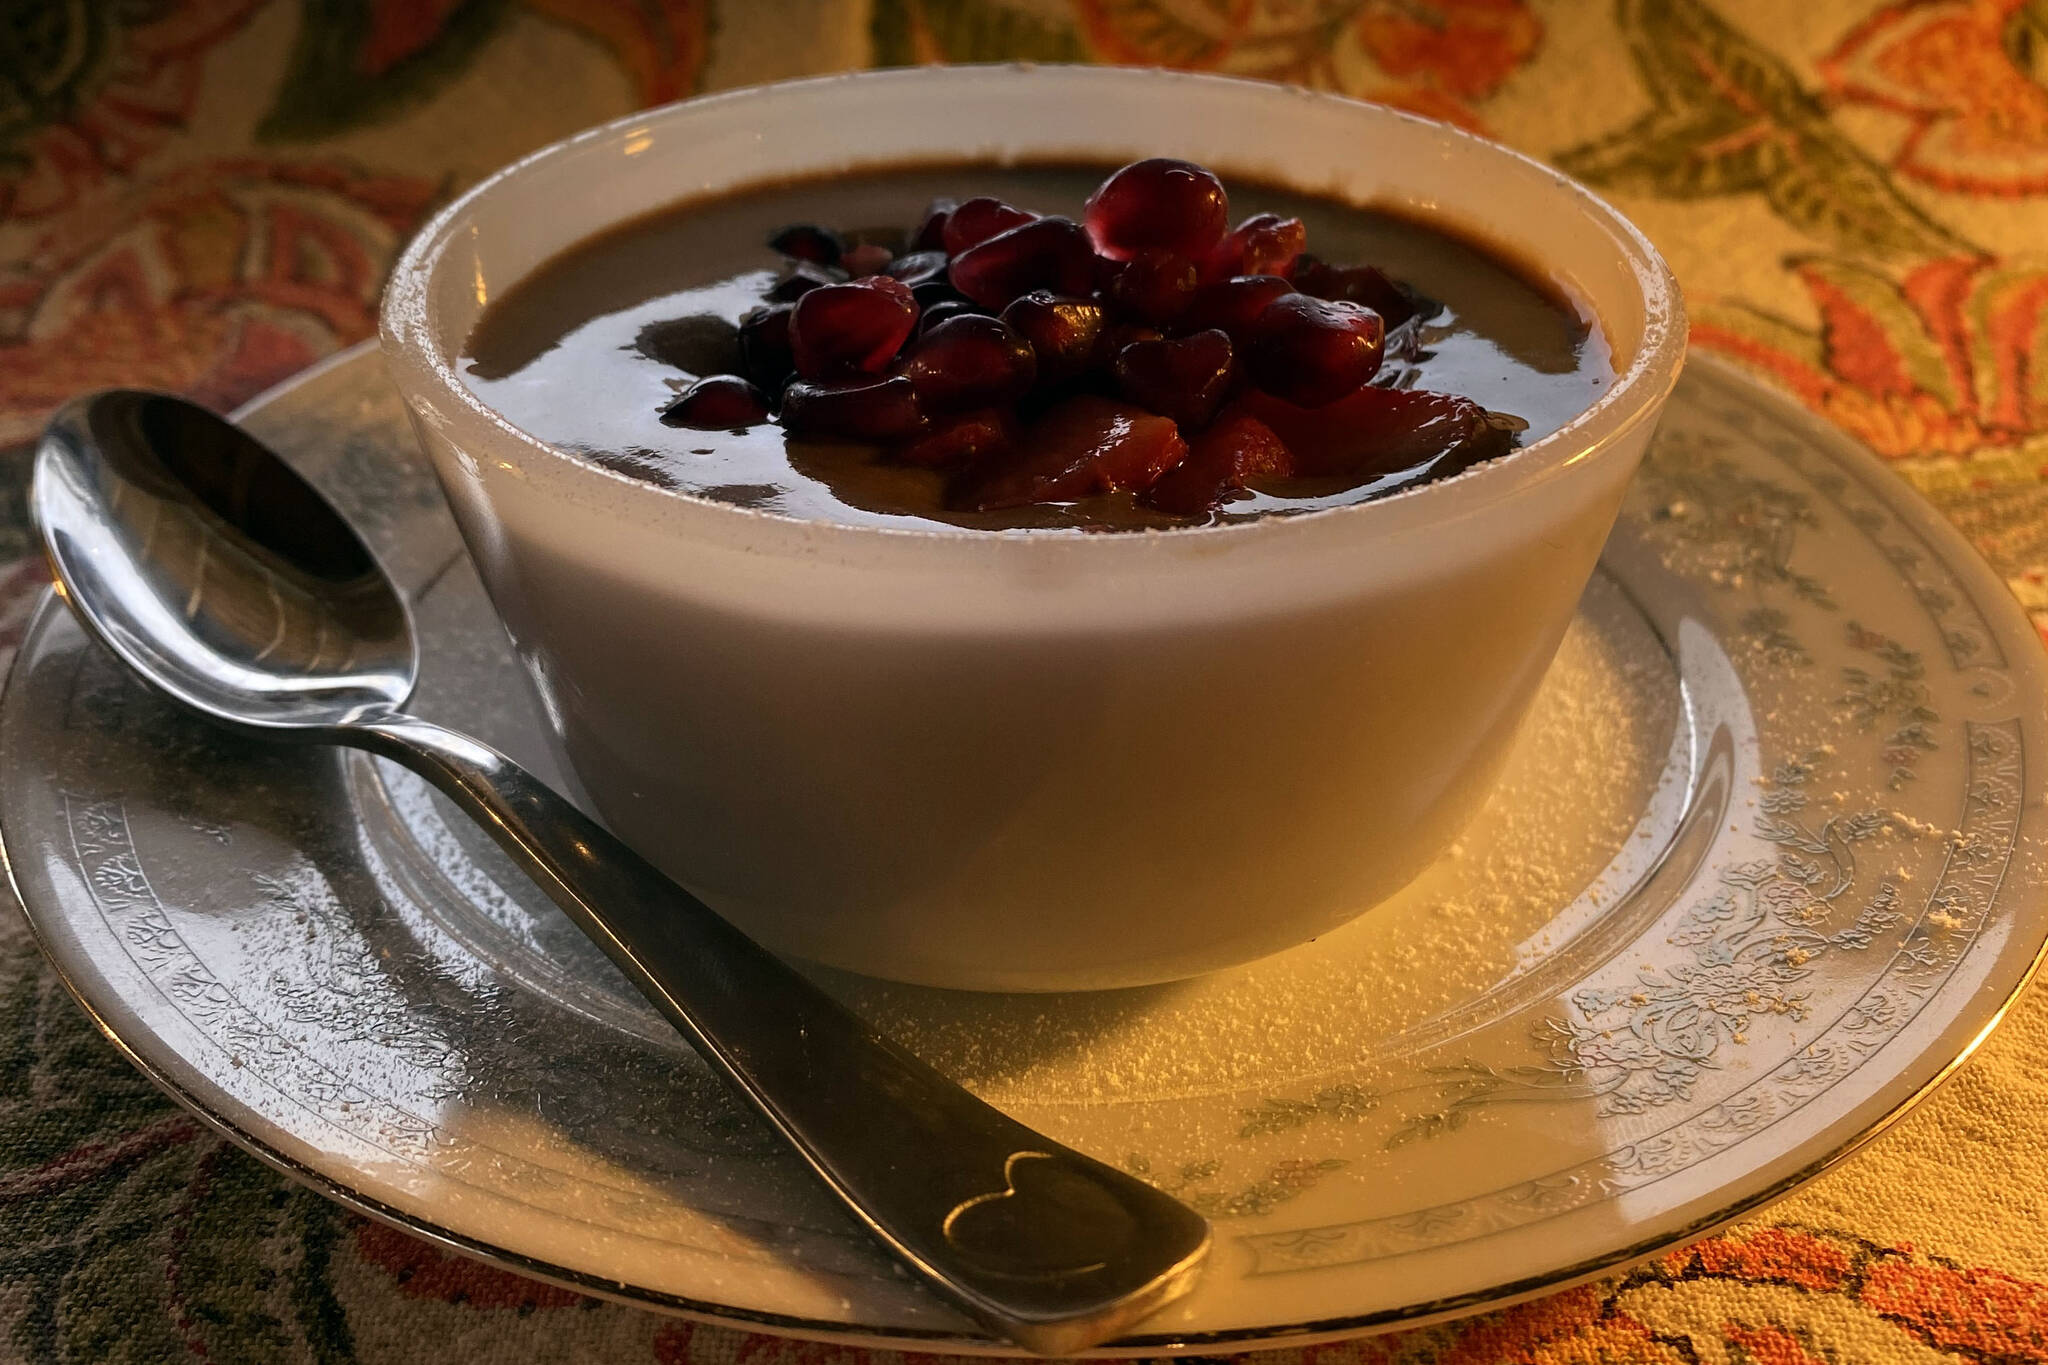 Rich chocolate pudding can use up excess milk products. (Photo by Tressa Dale/Peninsula Clarion)